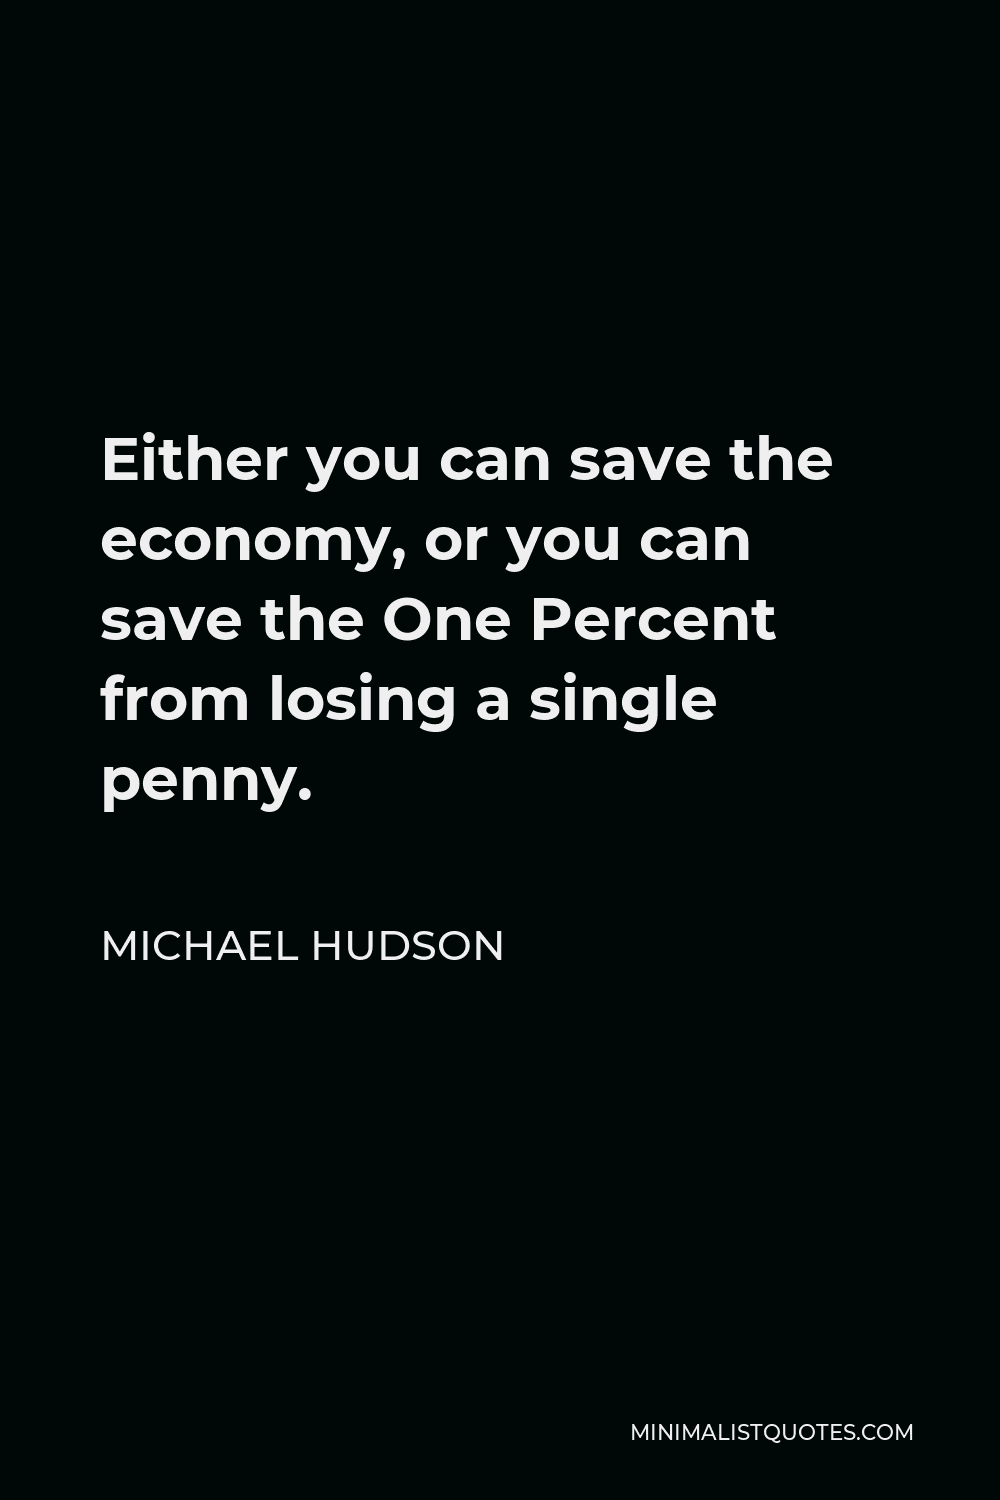 Michael Hudson Quote - Either you can save the economy, or you can save the One Percent from losing a single penny.